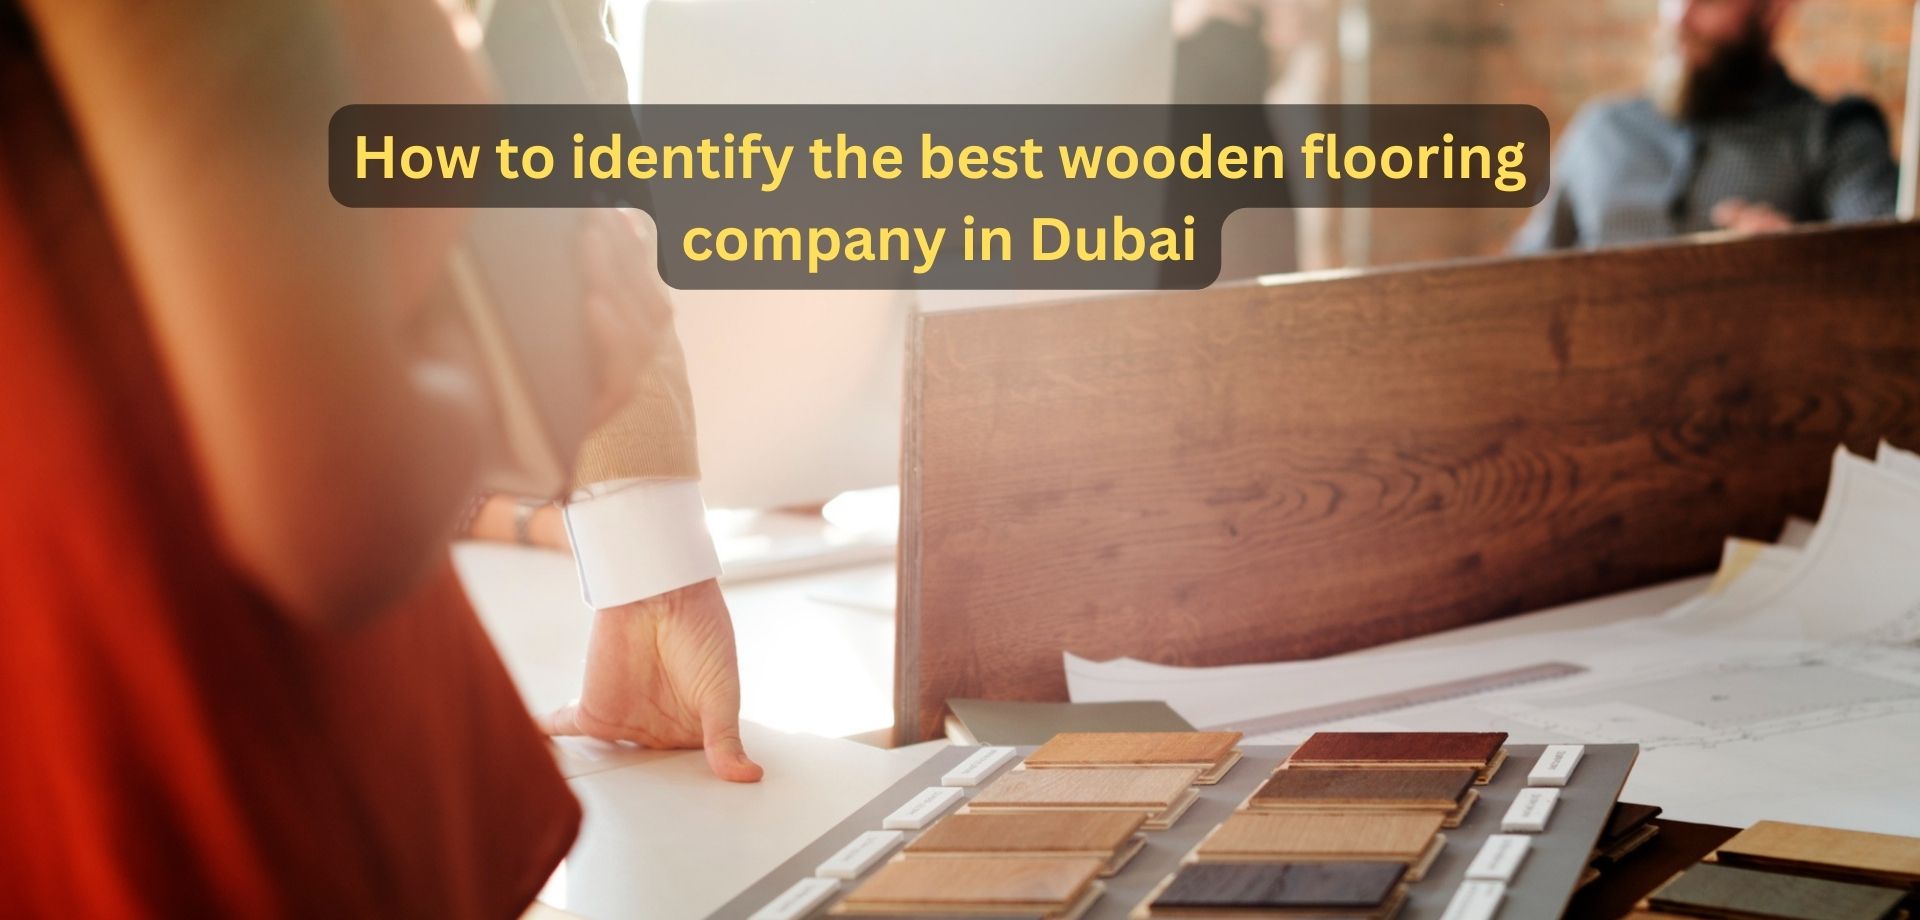 How to identify the best wooden flooring company in Dubai